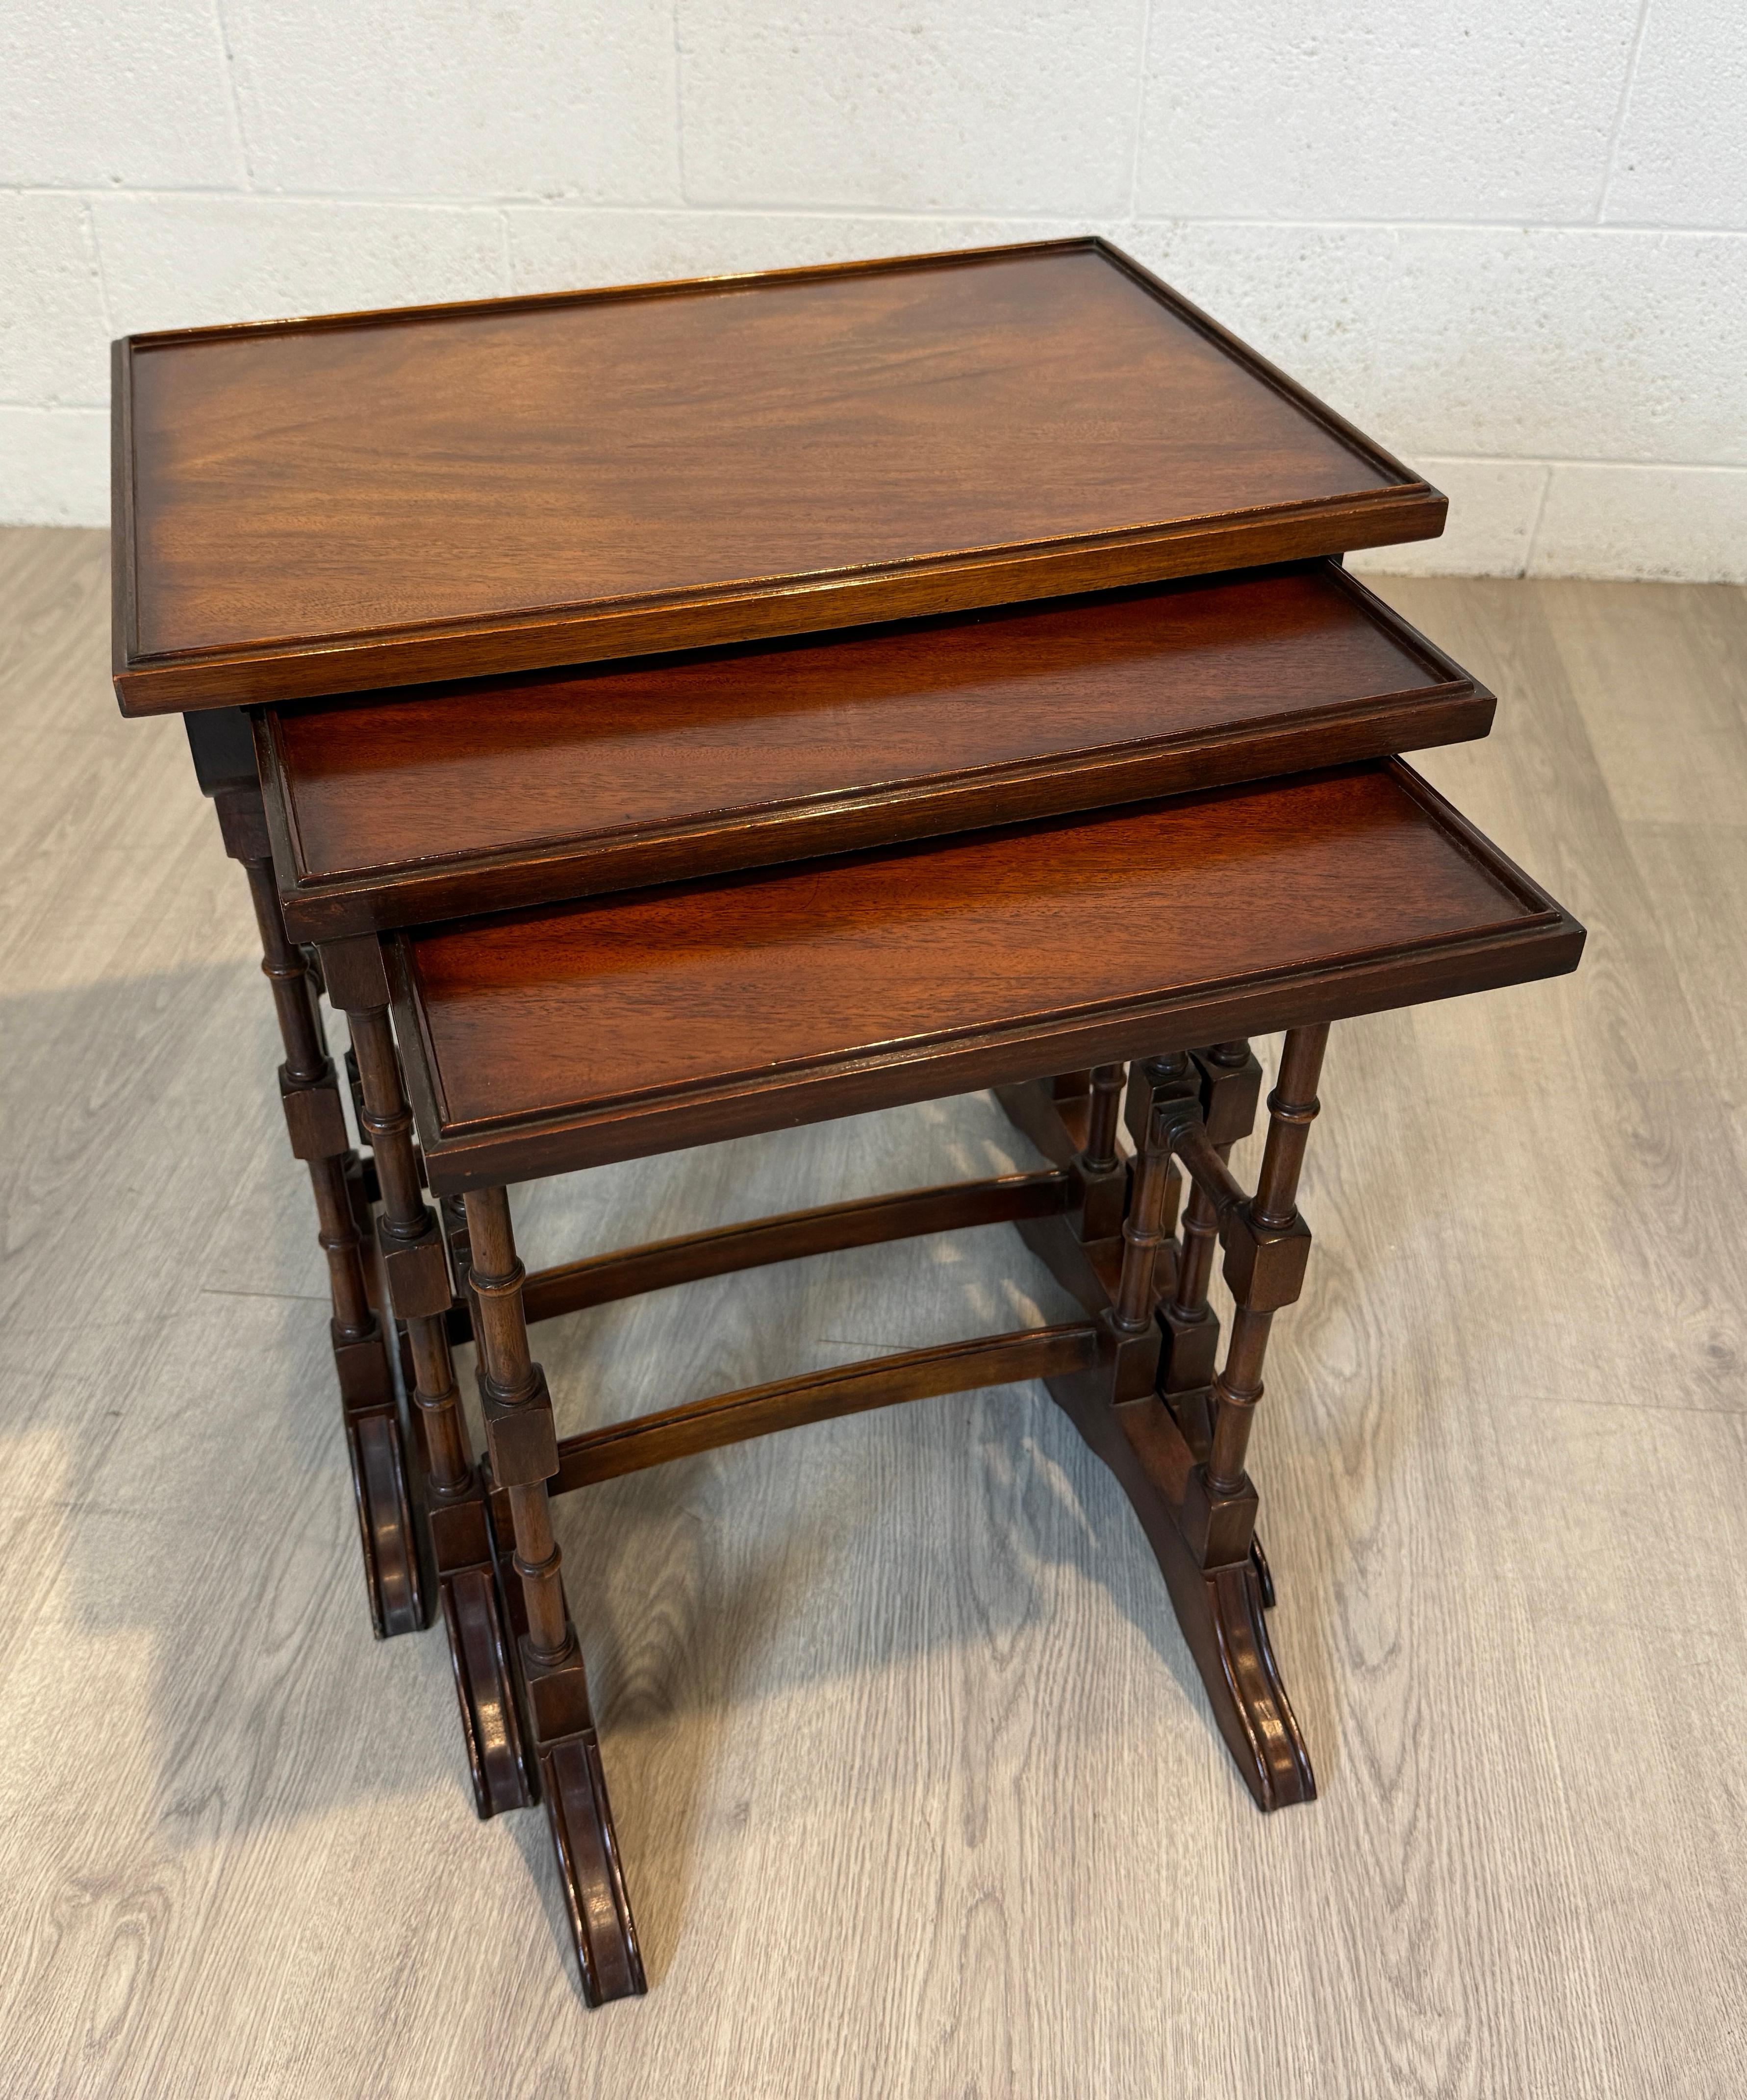 Who wouldn't want such a lovely set of 18th Century Style Regency Nesting Tables?  Crafted in Mahogany in England in the last century.  Not so old that they are too delicate for living, but having had  enough history to develop that rich patina